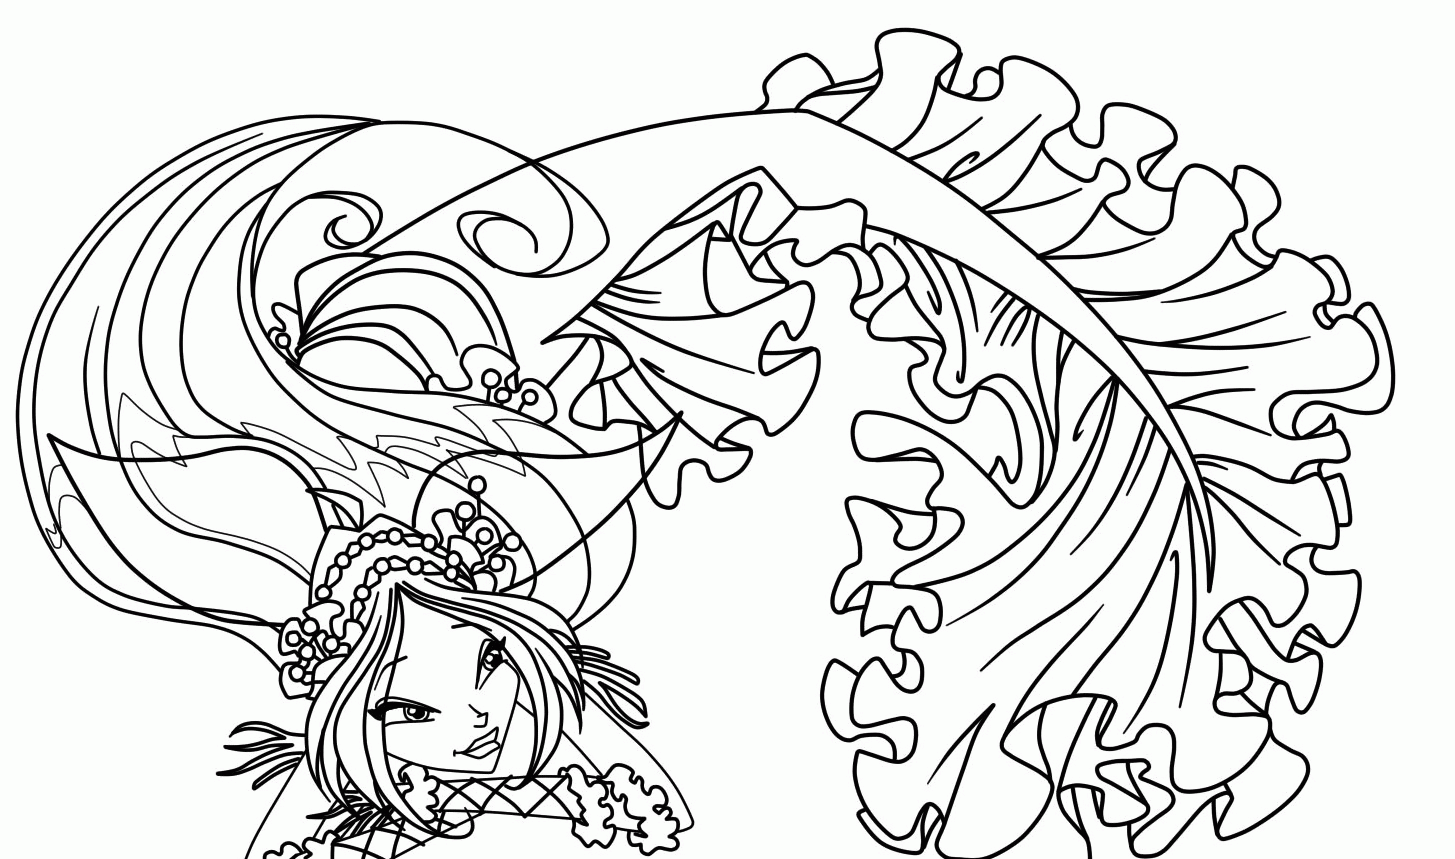 Related Winx Club Coloring Pages item-10524, Winx Club Coloring ...